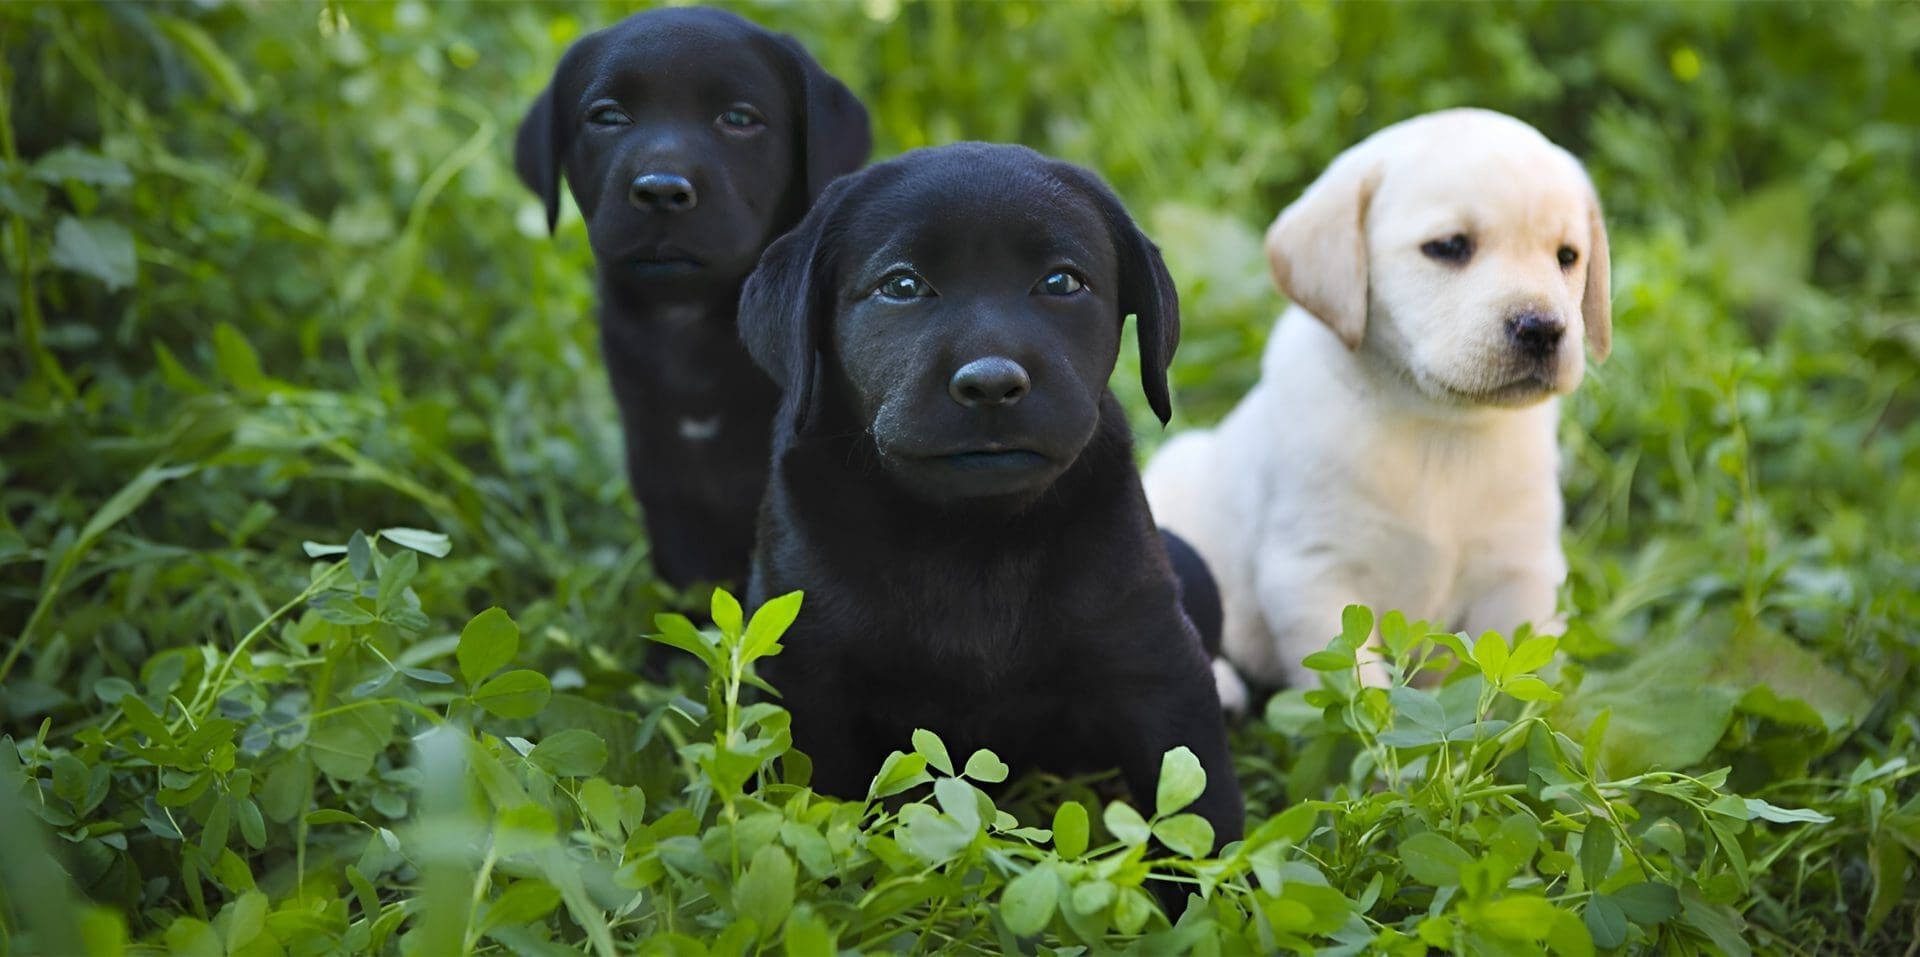 Three black and white puppies sitting in a field of green leaves.